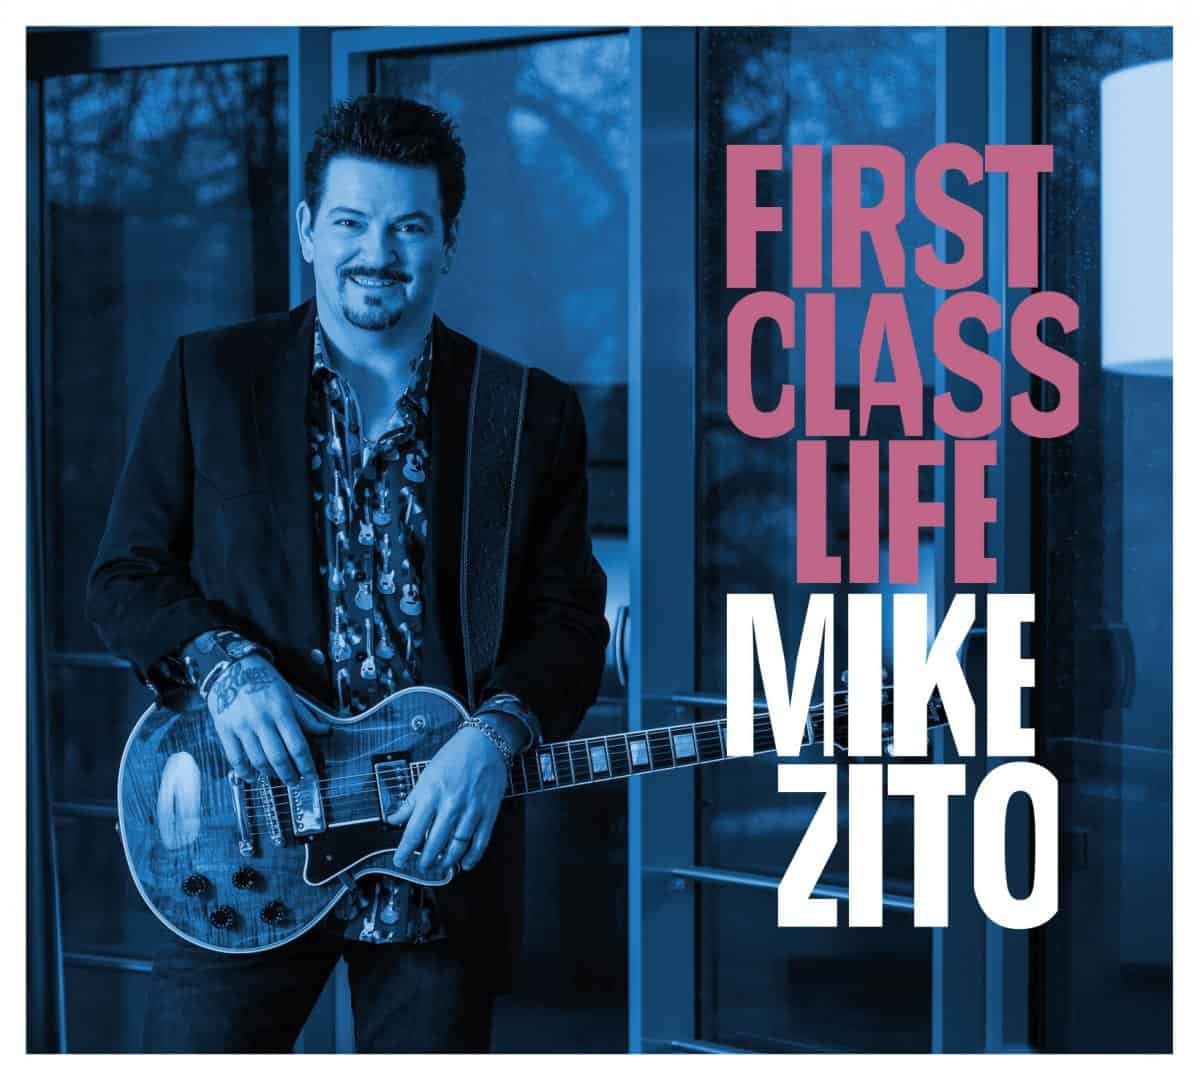 Mike Zito – “First Class Life”